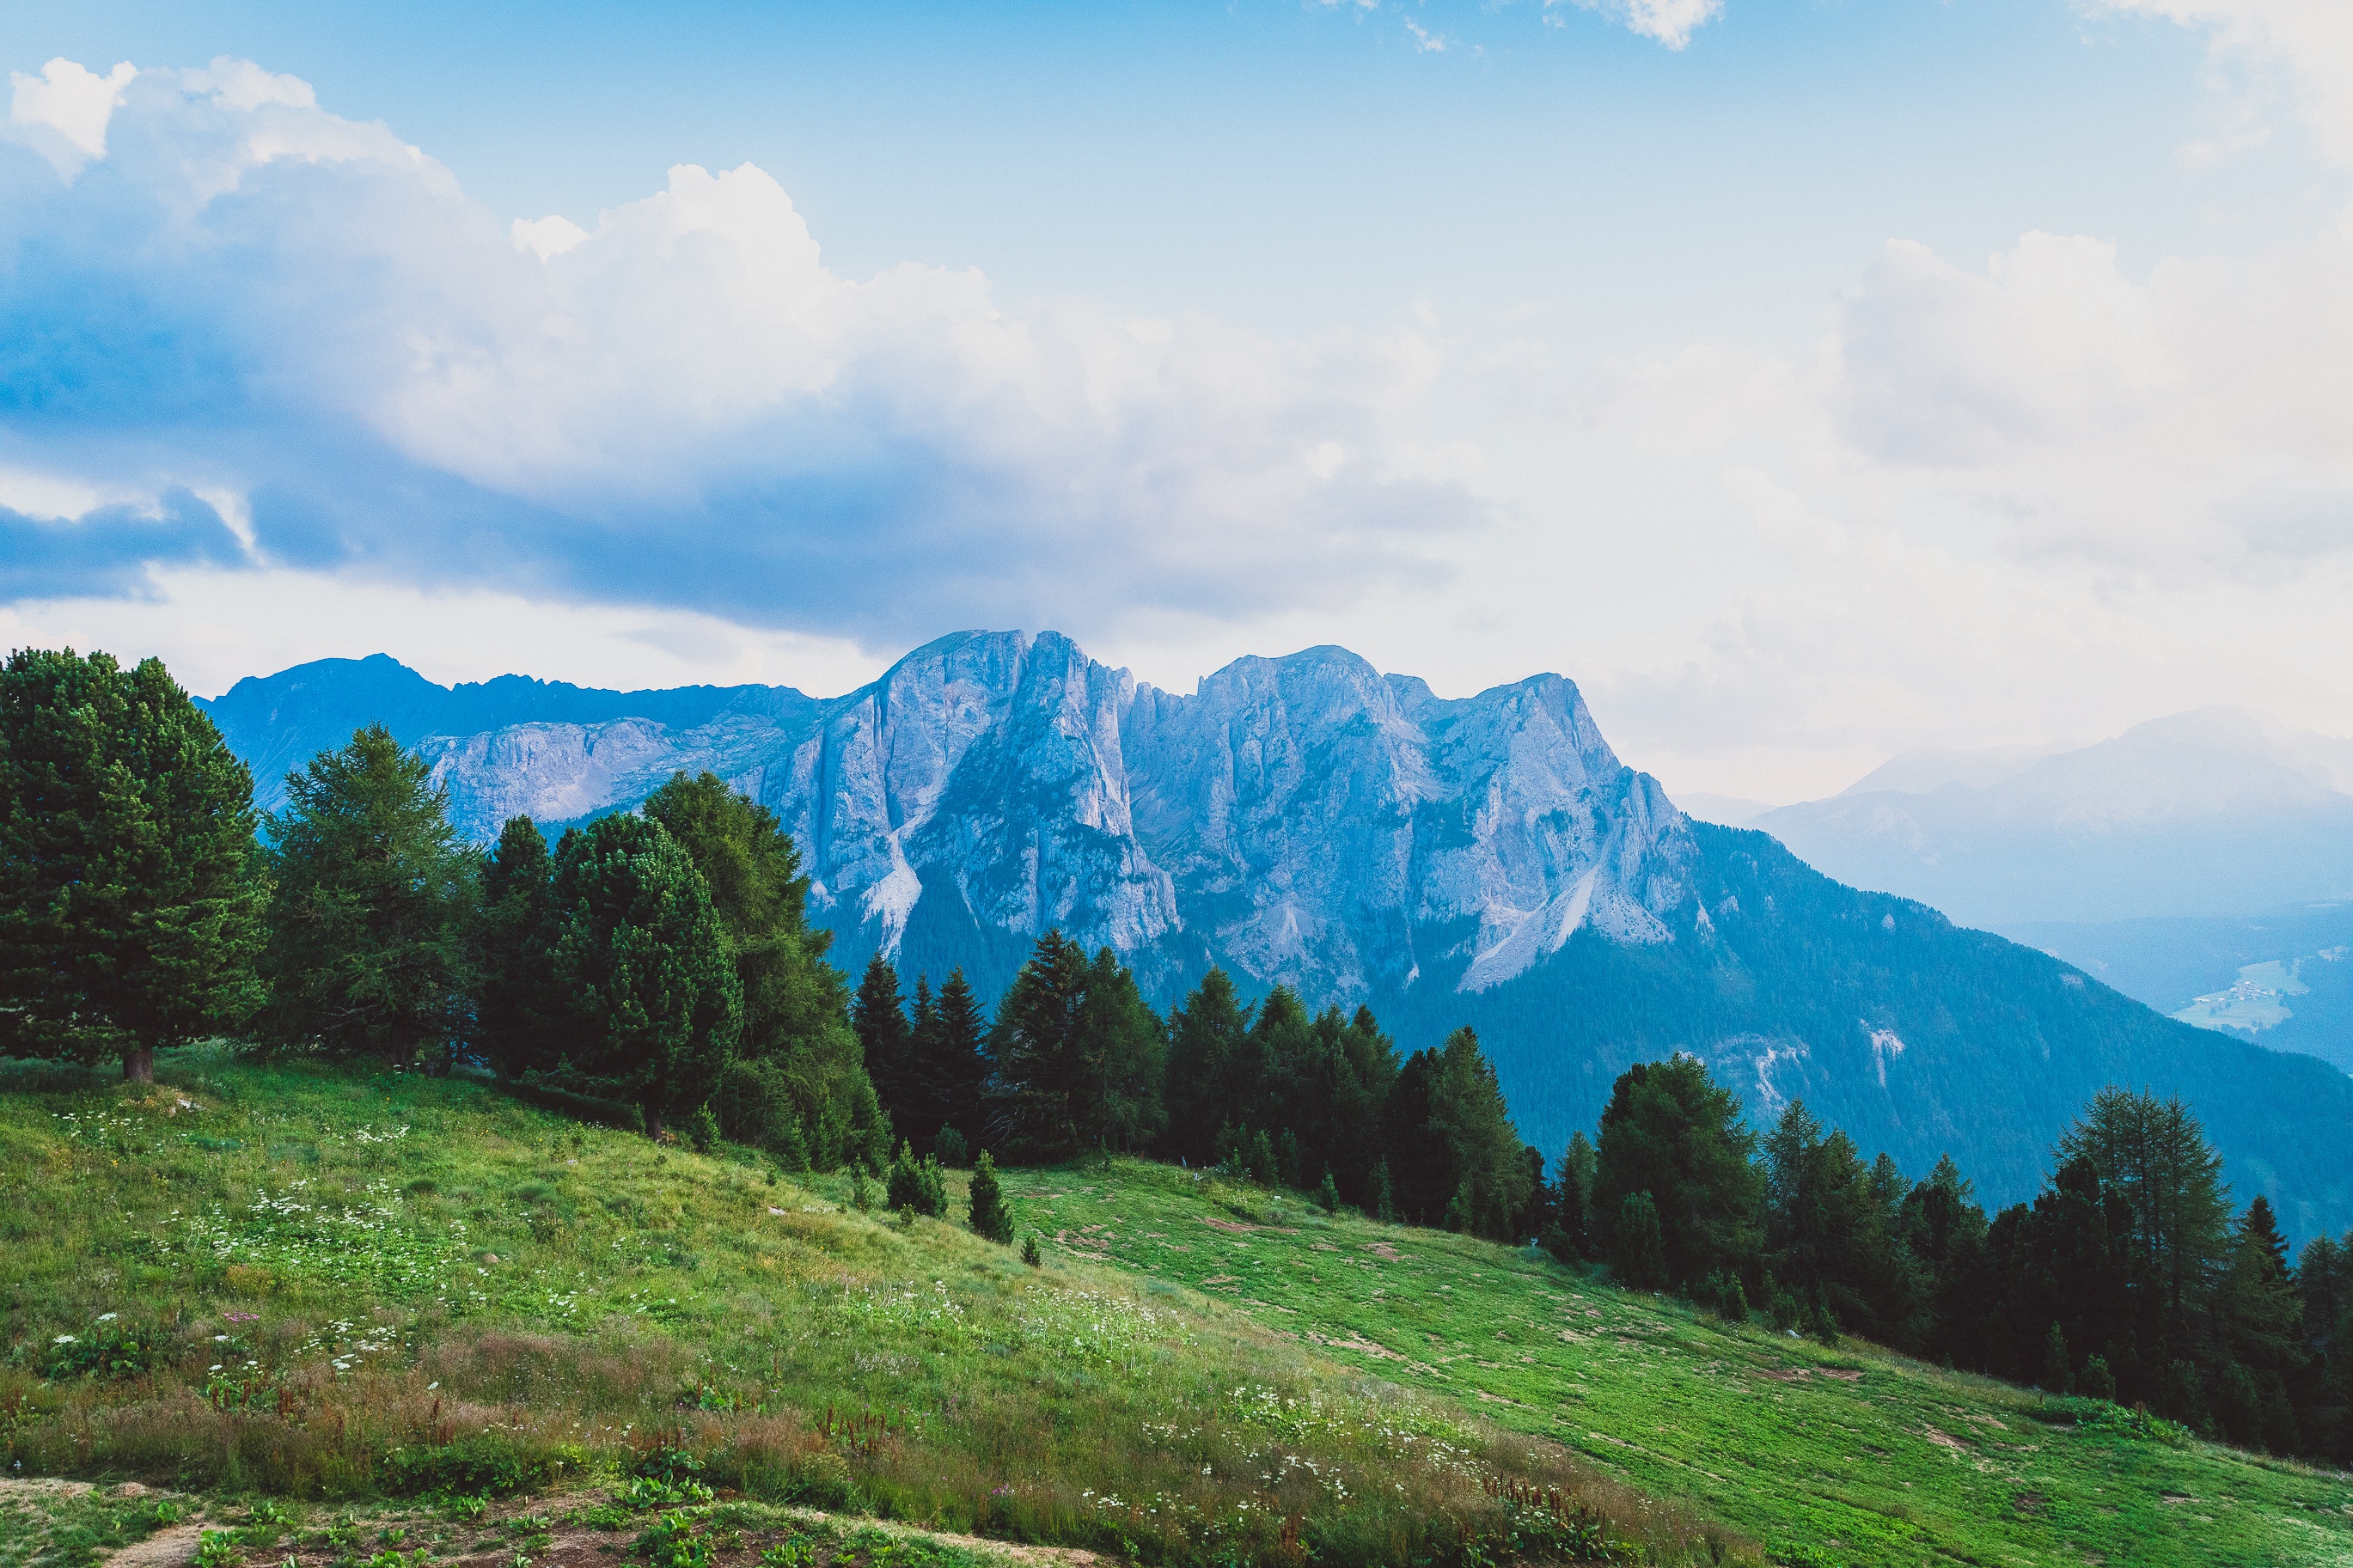 140733 download wallpaper nature, mountains, italy, meadow, dolomites, val di fassa screensavers and pictures for free